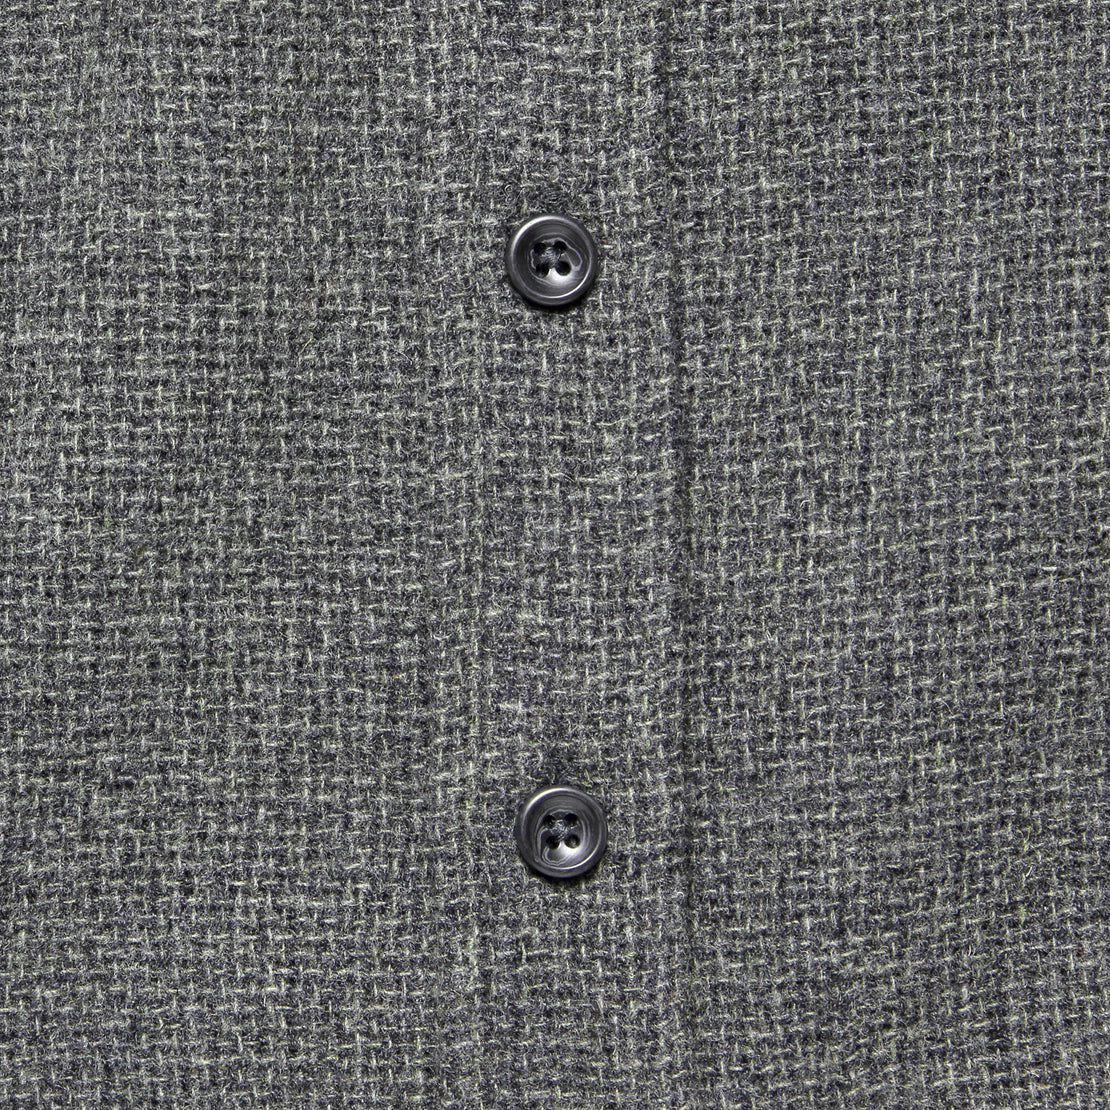 Service Shirt - Ash Melange Wool - Taylor Stitch - STAG Provisions - Tops - L/S Woven - Solid